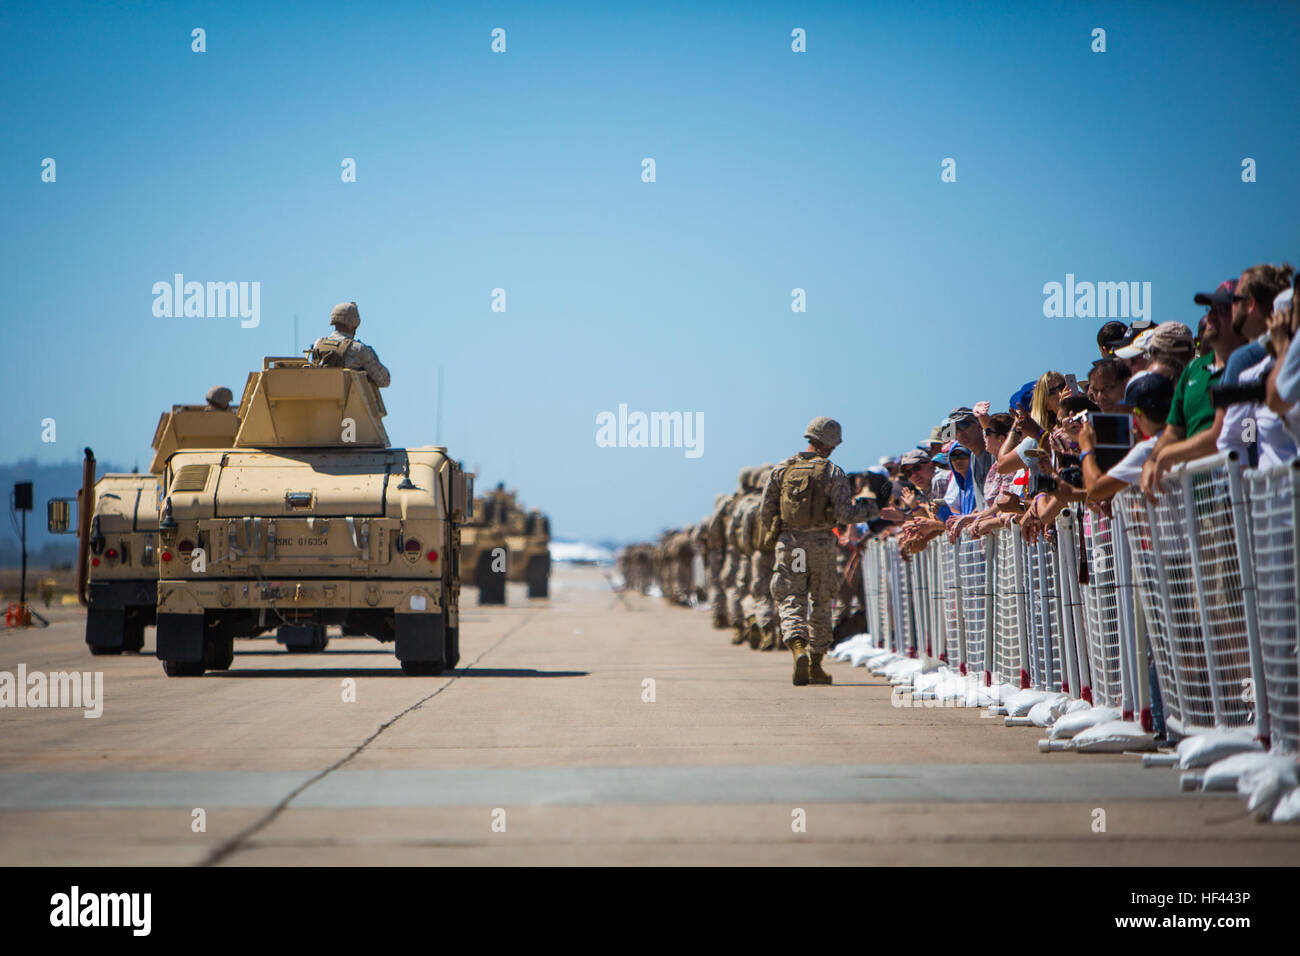 U.S. Marines with 1st Marine Expeditionary Force wave to a crowd of onlookers while executing a mounted foot patrol as part of the Marine Air Ground Task Force (MAGTF) demonstration during the 2016 Marine Corps Air Station (MCAS) Miramar Air Show at MCAS Miramar, Calif., Sept. 24, 2016. The MCAS Miramar Air Show honors 100 years of the Marine Corps Reserves by showcasing aerial prowess of the Armed Forces and their appreciation of the civilian community’s support to the troops. (U.S. Marine Corps photo By Corporal Jessica Y. Lucio/Released) MCAS Miramar Air Show 160924-M-UX416-031 Stock Photo